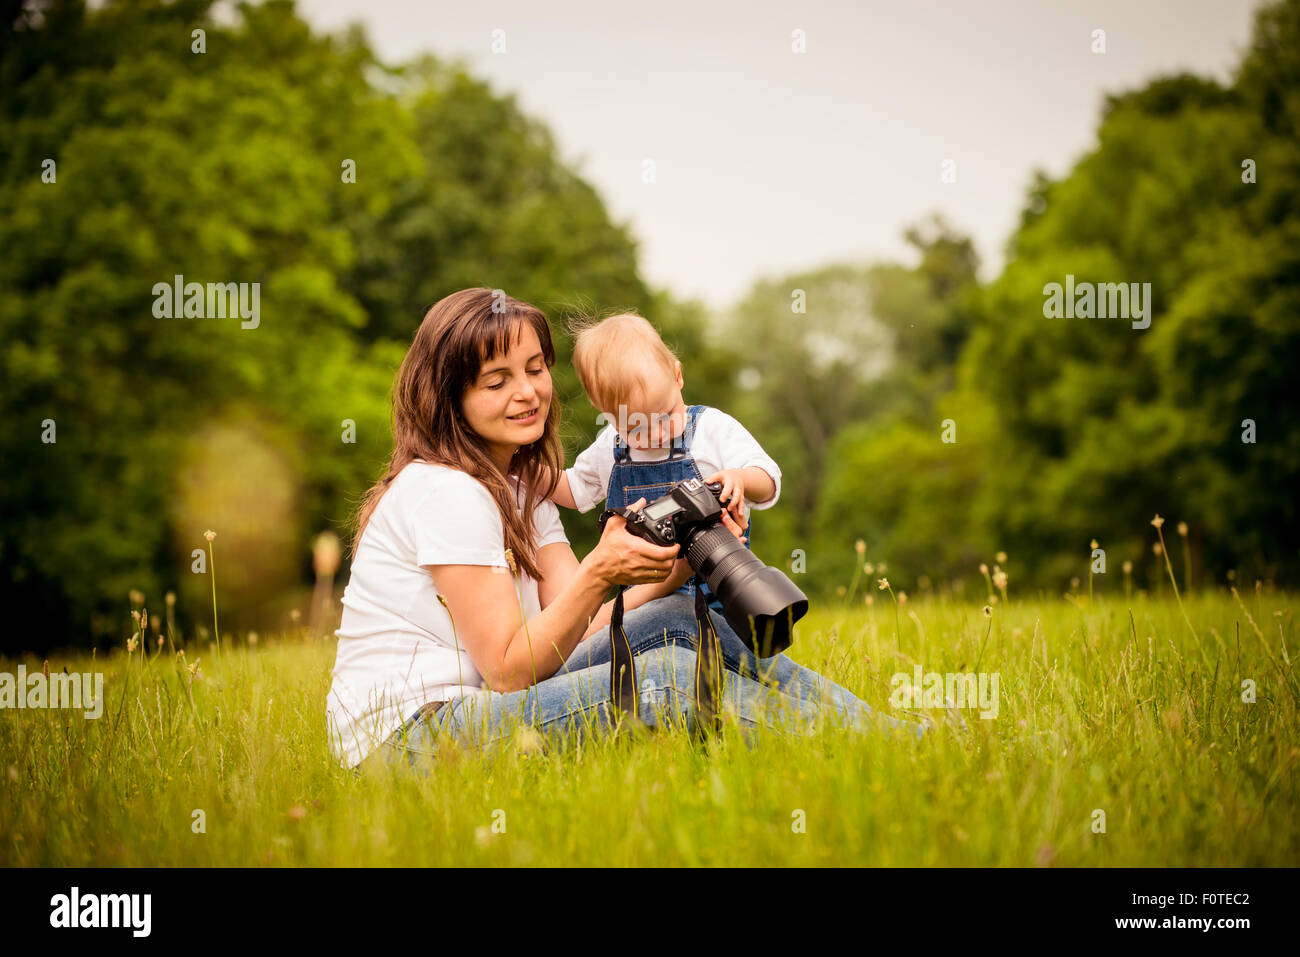 Mother showing her kid captured photos on dslr camera outdoor in nature Stock Photo